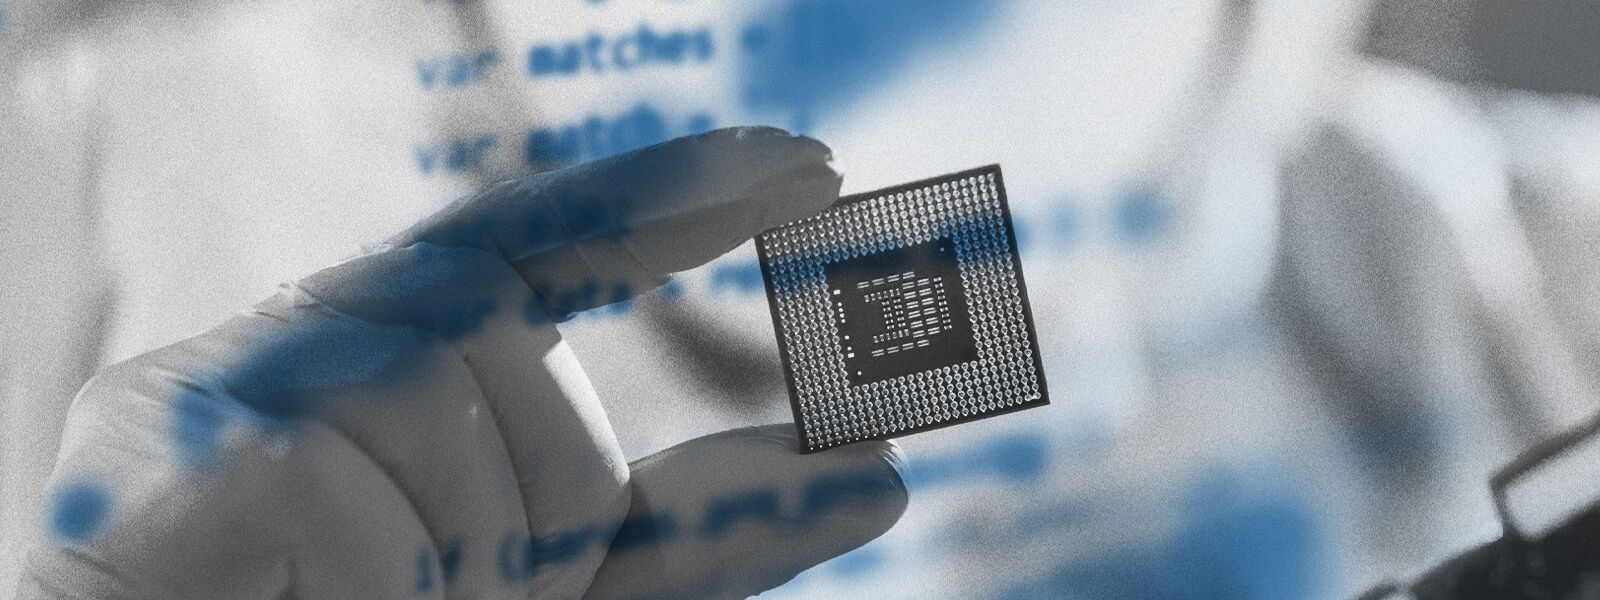 Semiconductor Companies Targeted by Ransomware